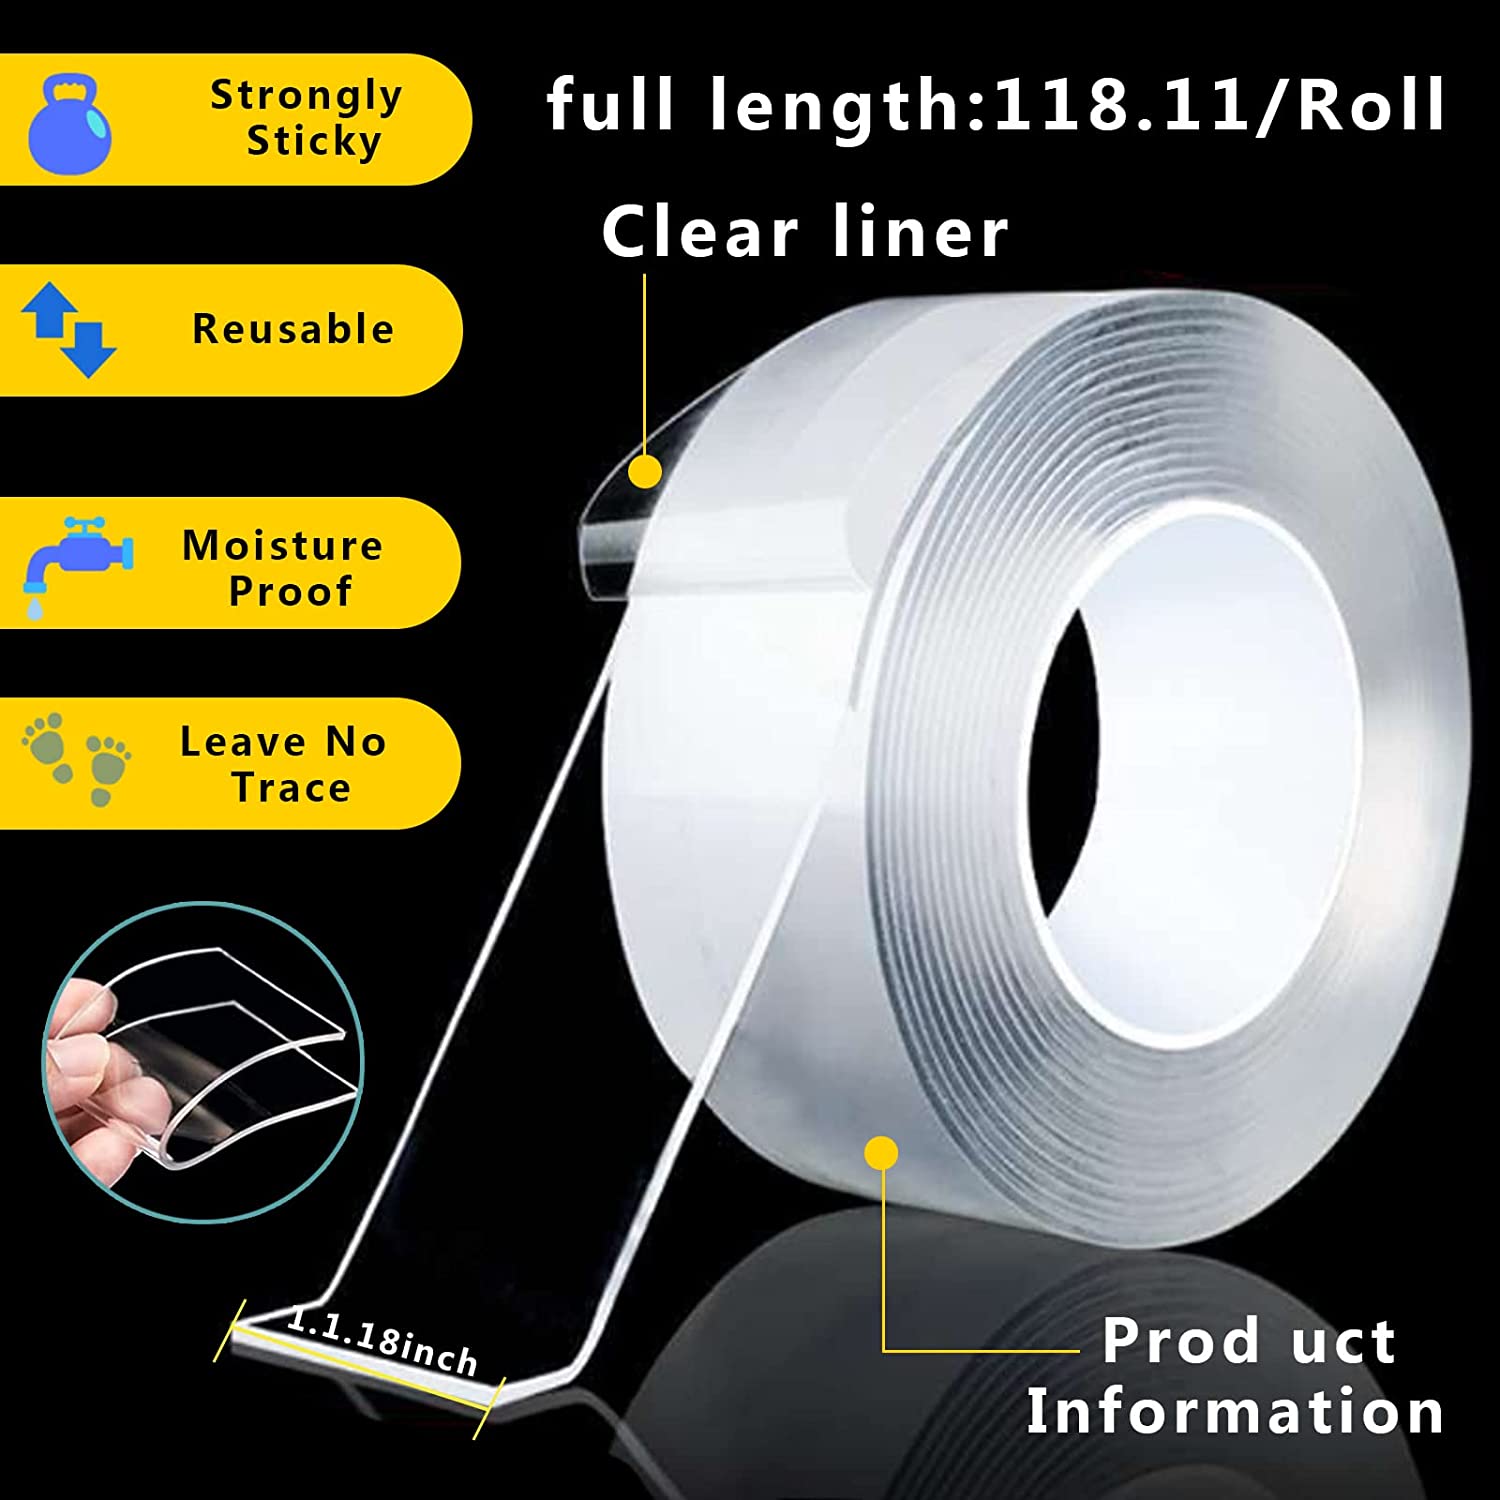 CZoffpro Double Sided Tape Heavy Duty - Strong Grip Picture Hanging Stripes  Nano Adhesive Tape Two Sided Tape, Transparent Double Stick Wall Tape  Poster Tape Carpet Tape Picture Tape, 1.18 x 80 dealsaving